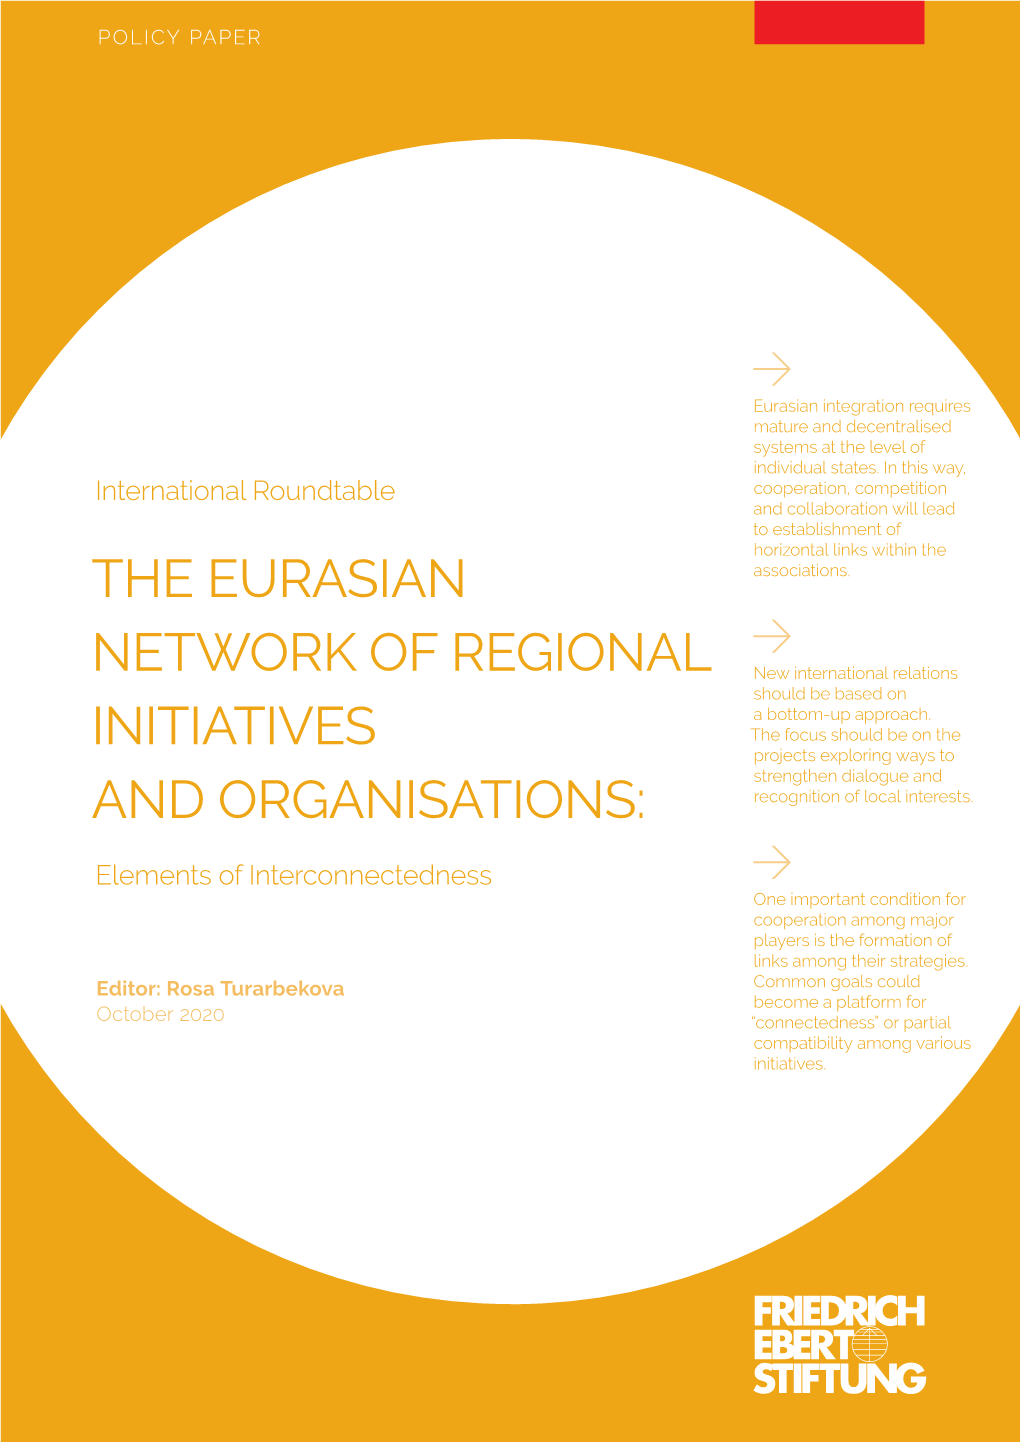 The Eurasian Network of Regional Initiatives and Organisations: Elements of Interconnectedness